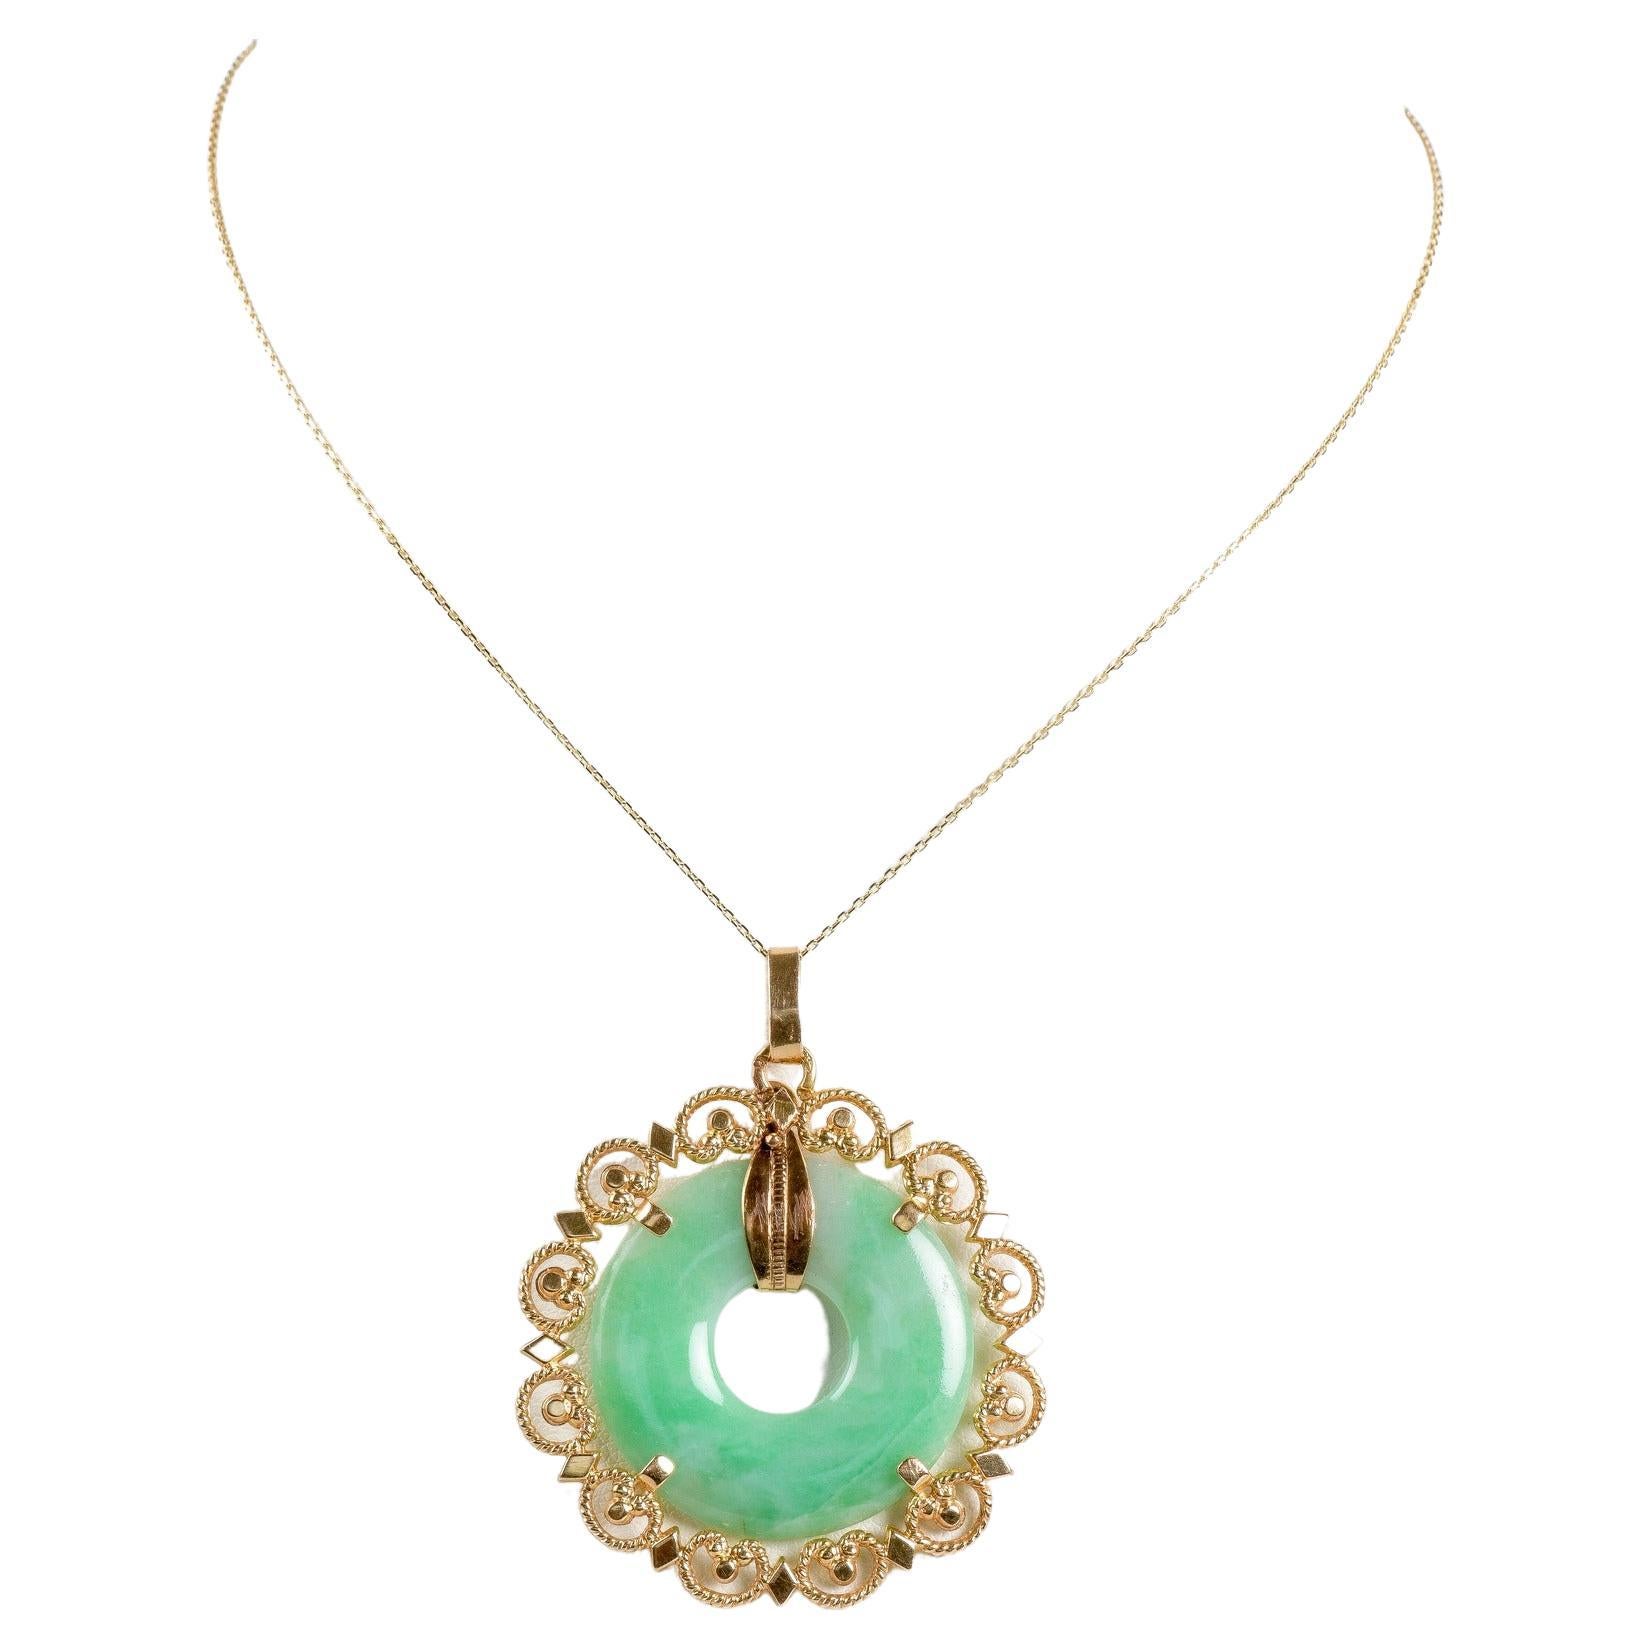 Necklace in 18 carats yellow gold with a jade's pendant in the shape of donut